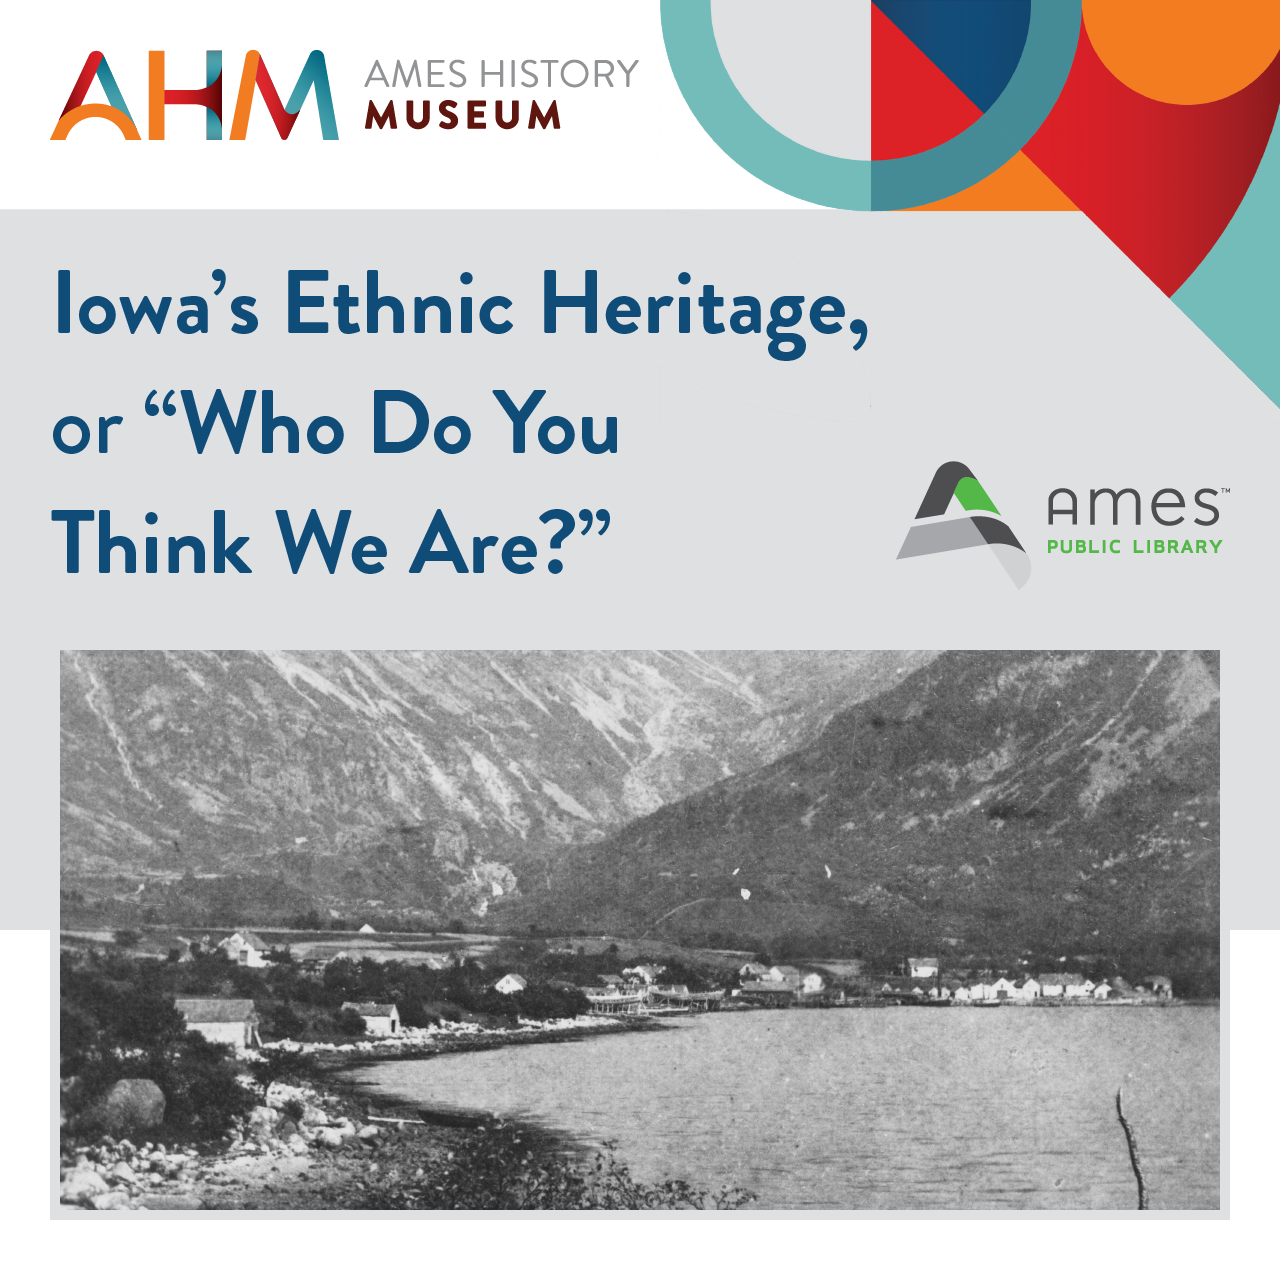 Ames History Museum - Iowa's Ethnic Heritage, or "Who Do You Think We Are?"